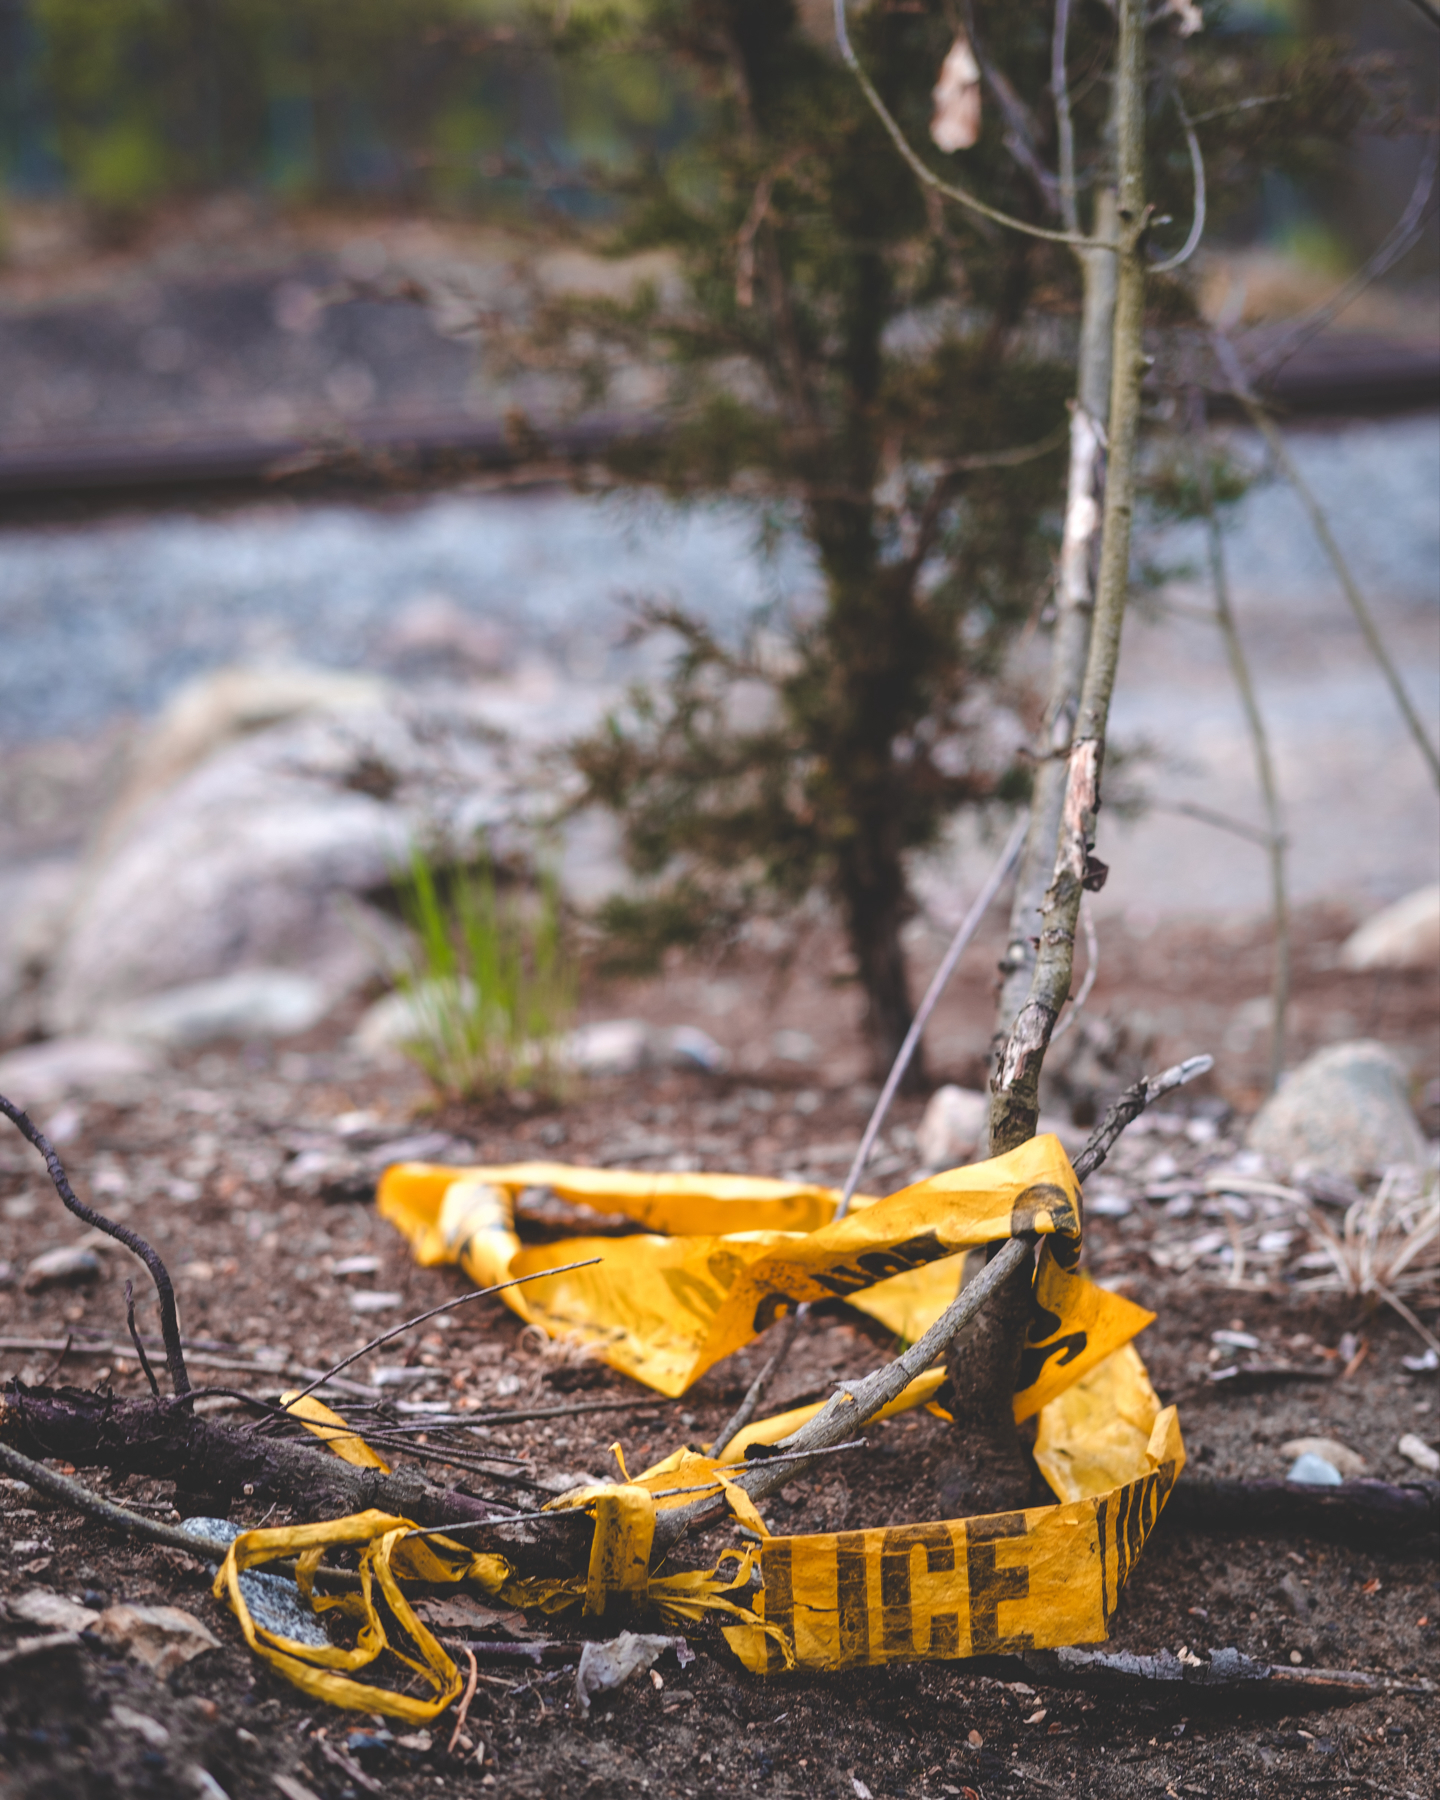 Yellow police caution tape entangled in branches on the ground outdoors in front of a small pine tree